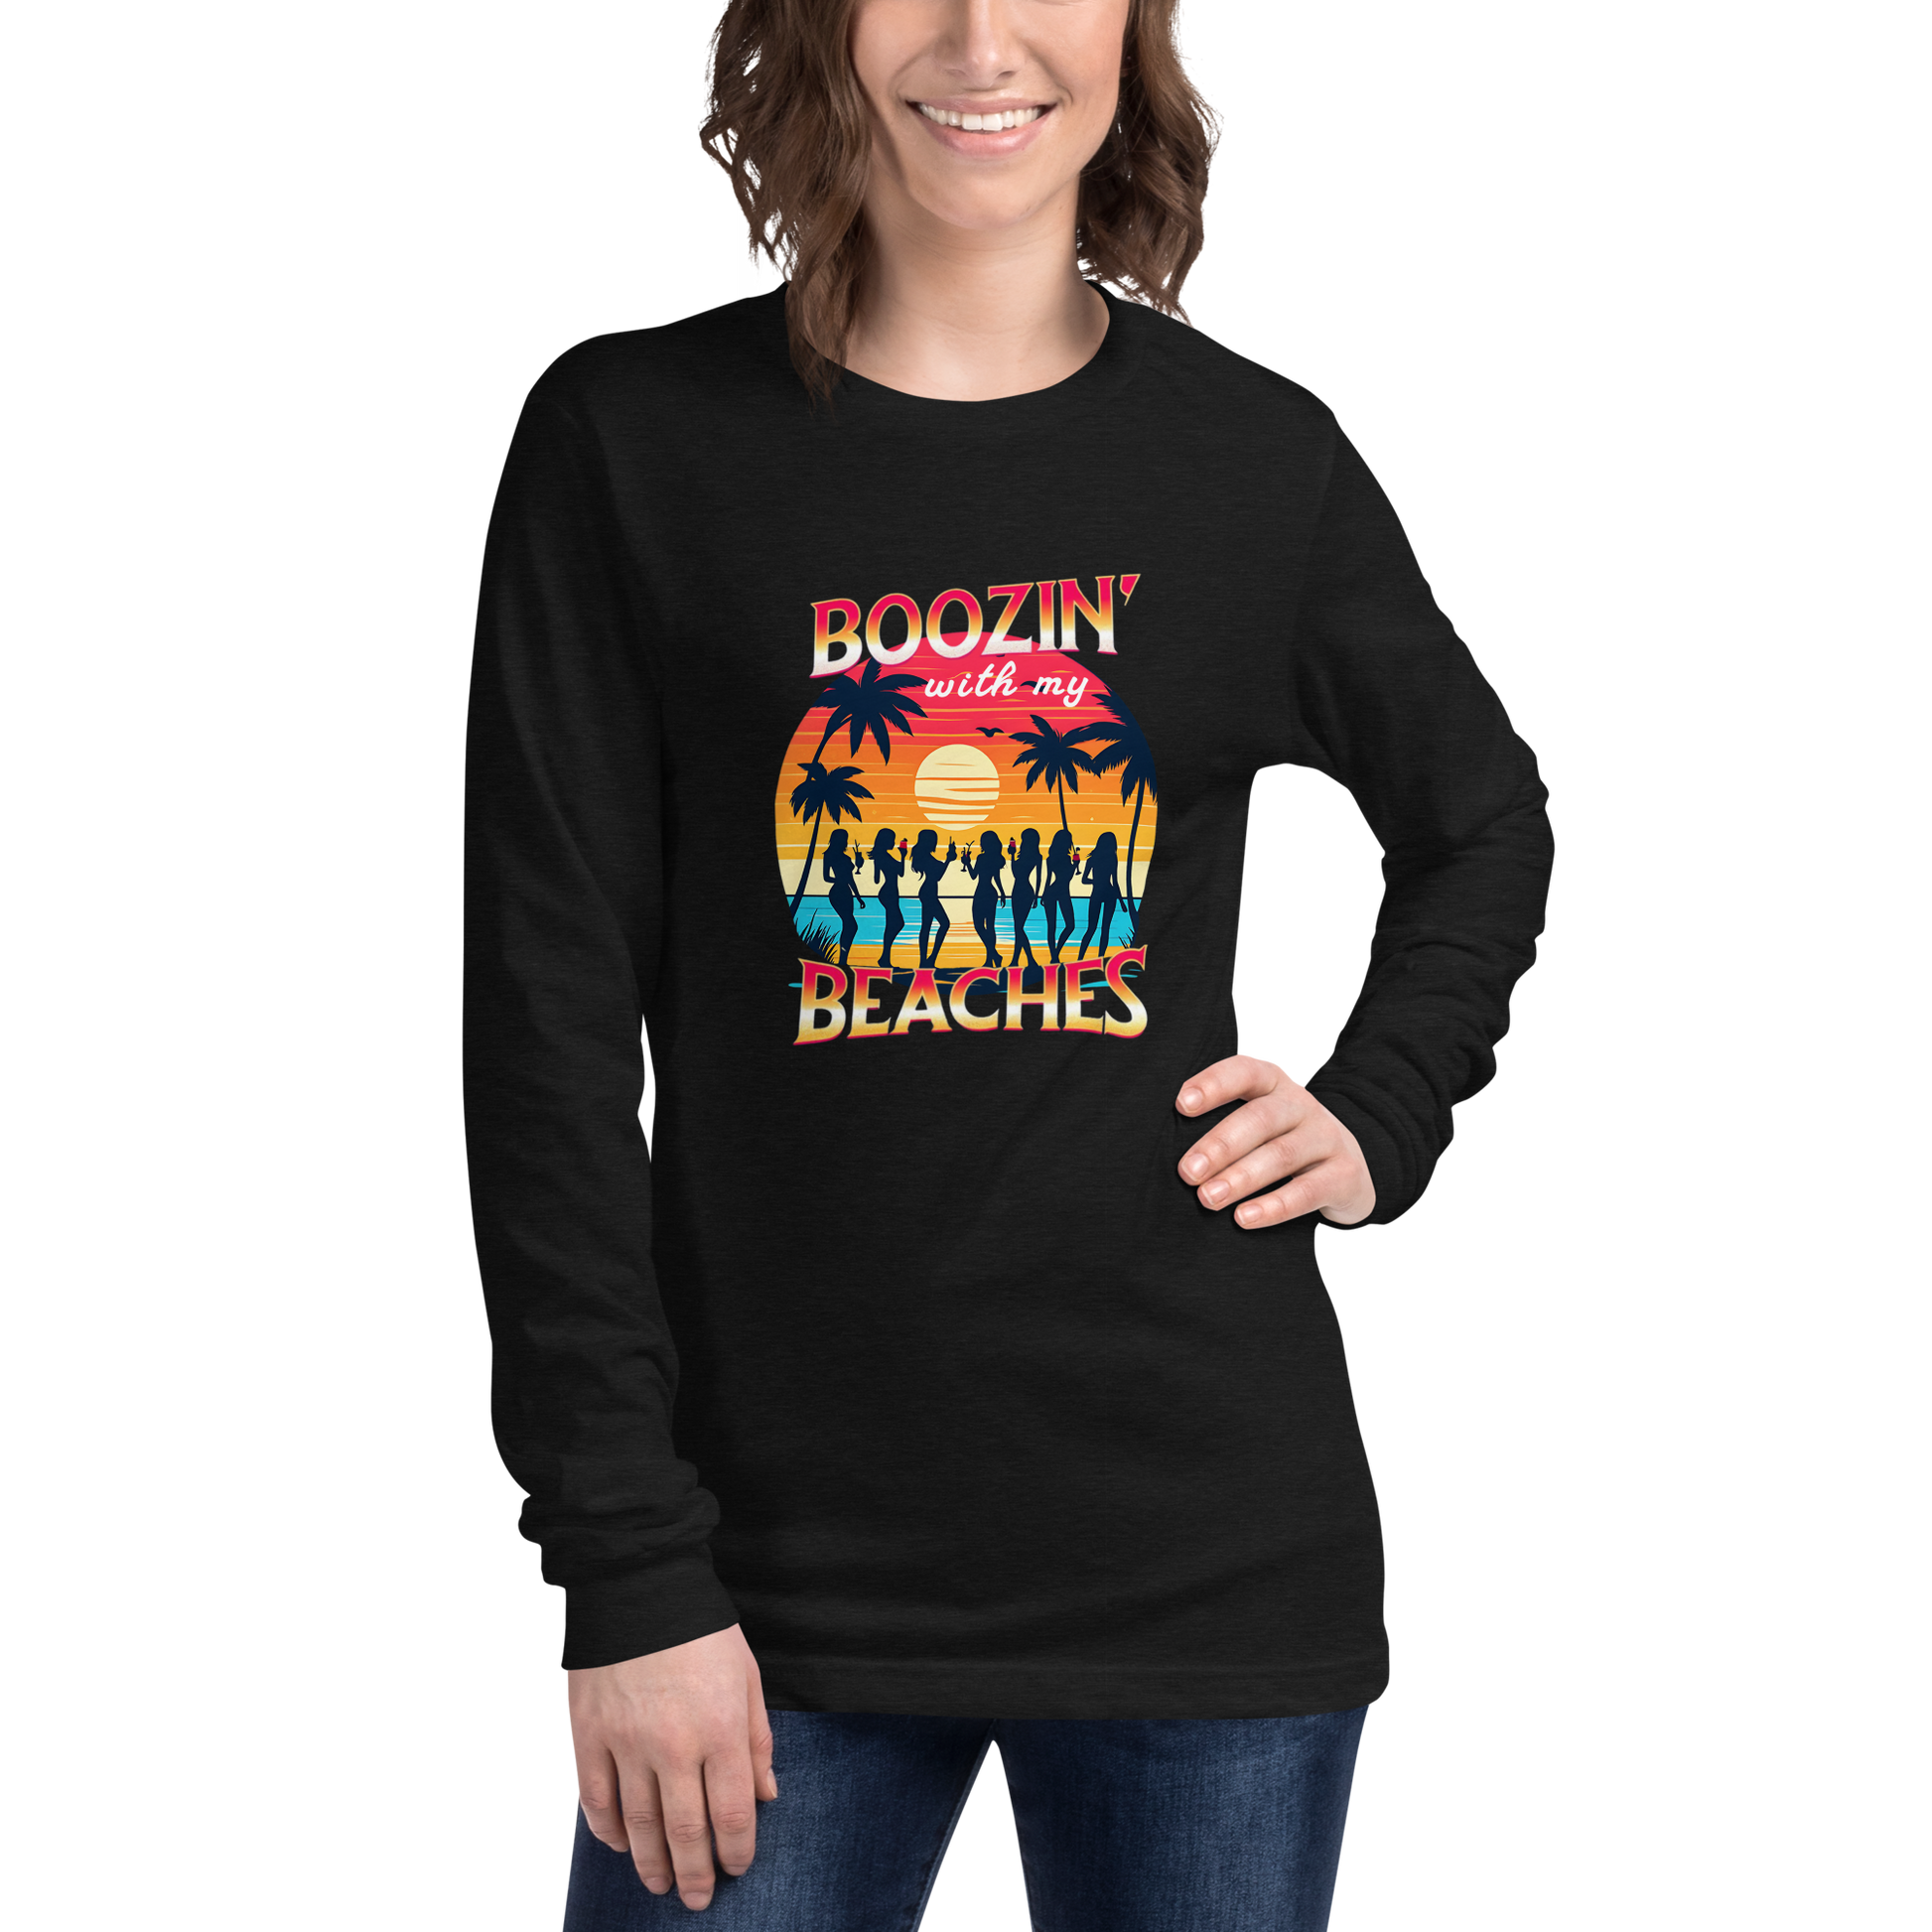 Silhouettes of women with cocktails on the beach, on 'Boozin' with My Beaches' long sleeve tee.